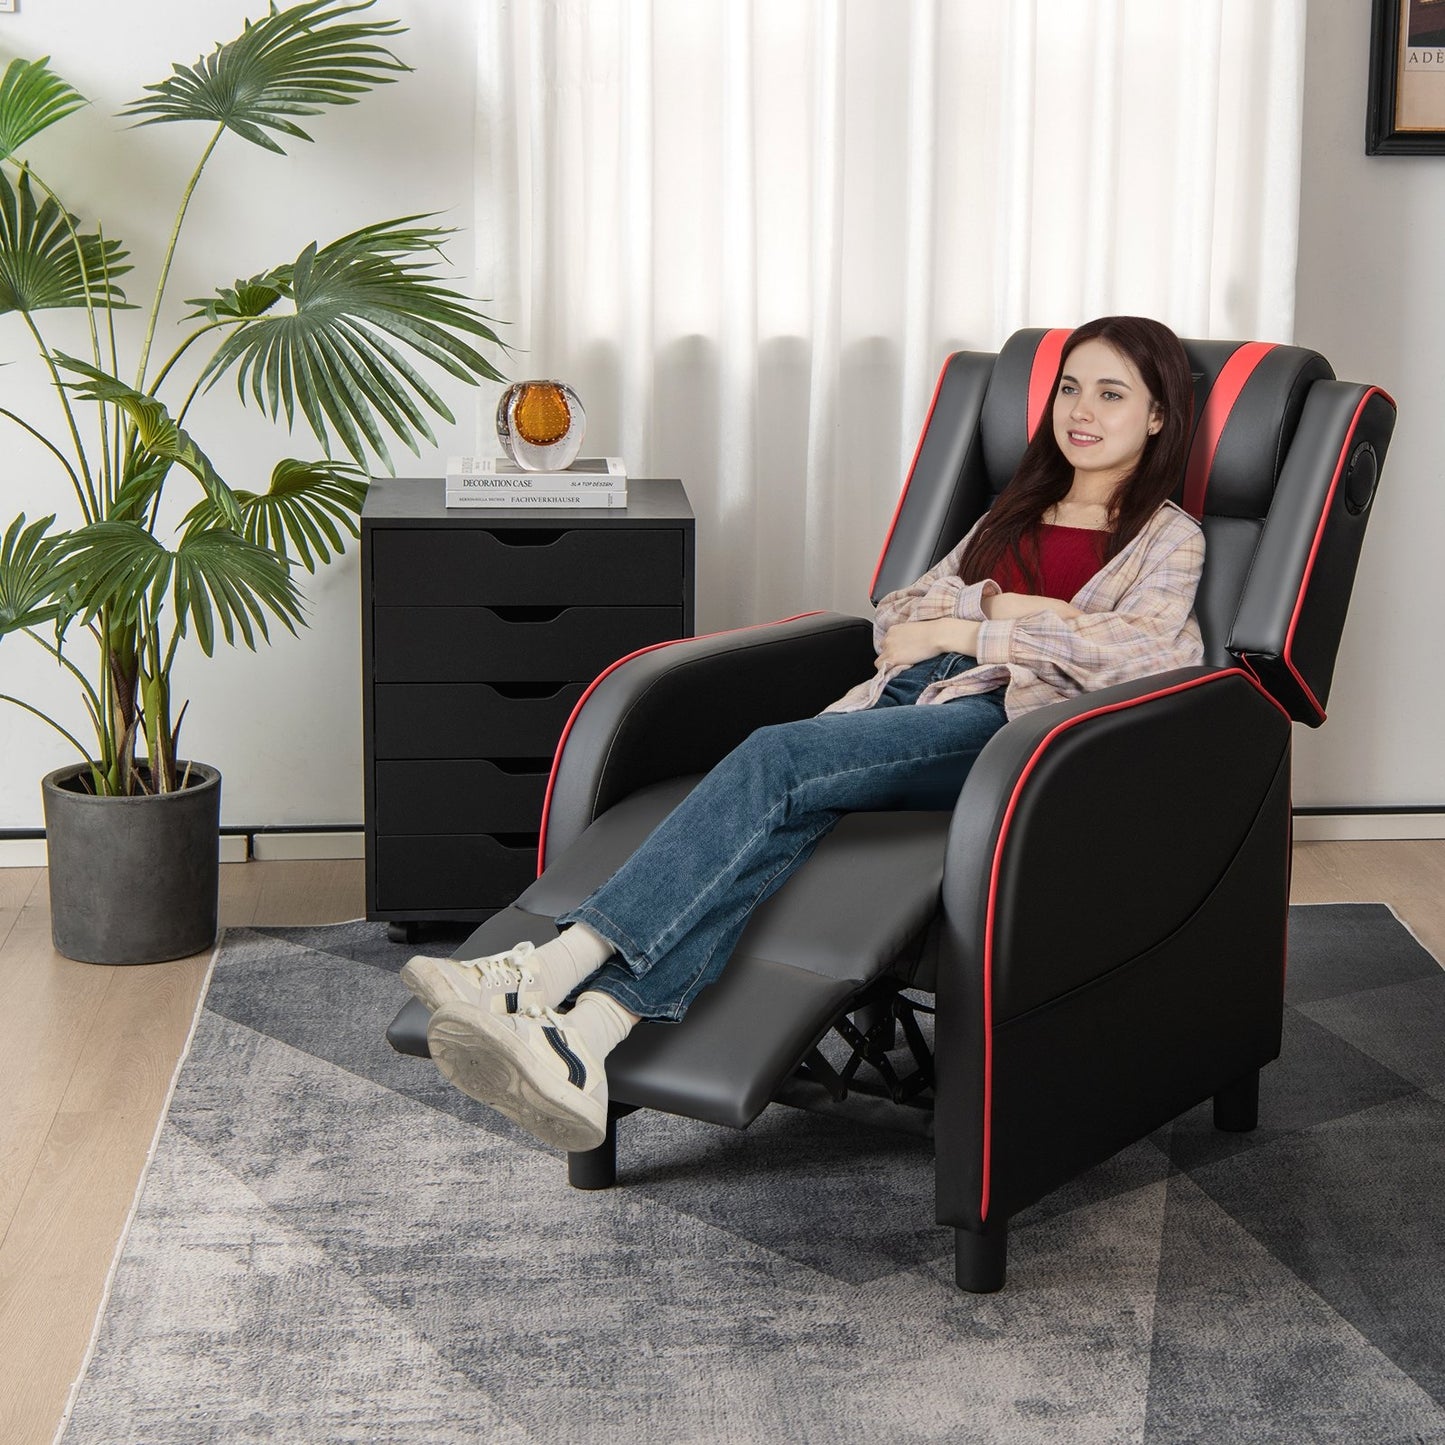 PU Leather Massage Gaming Recliner Chair with Side Pockets, Red